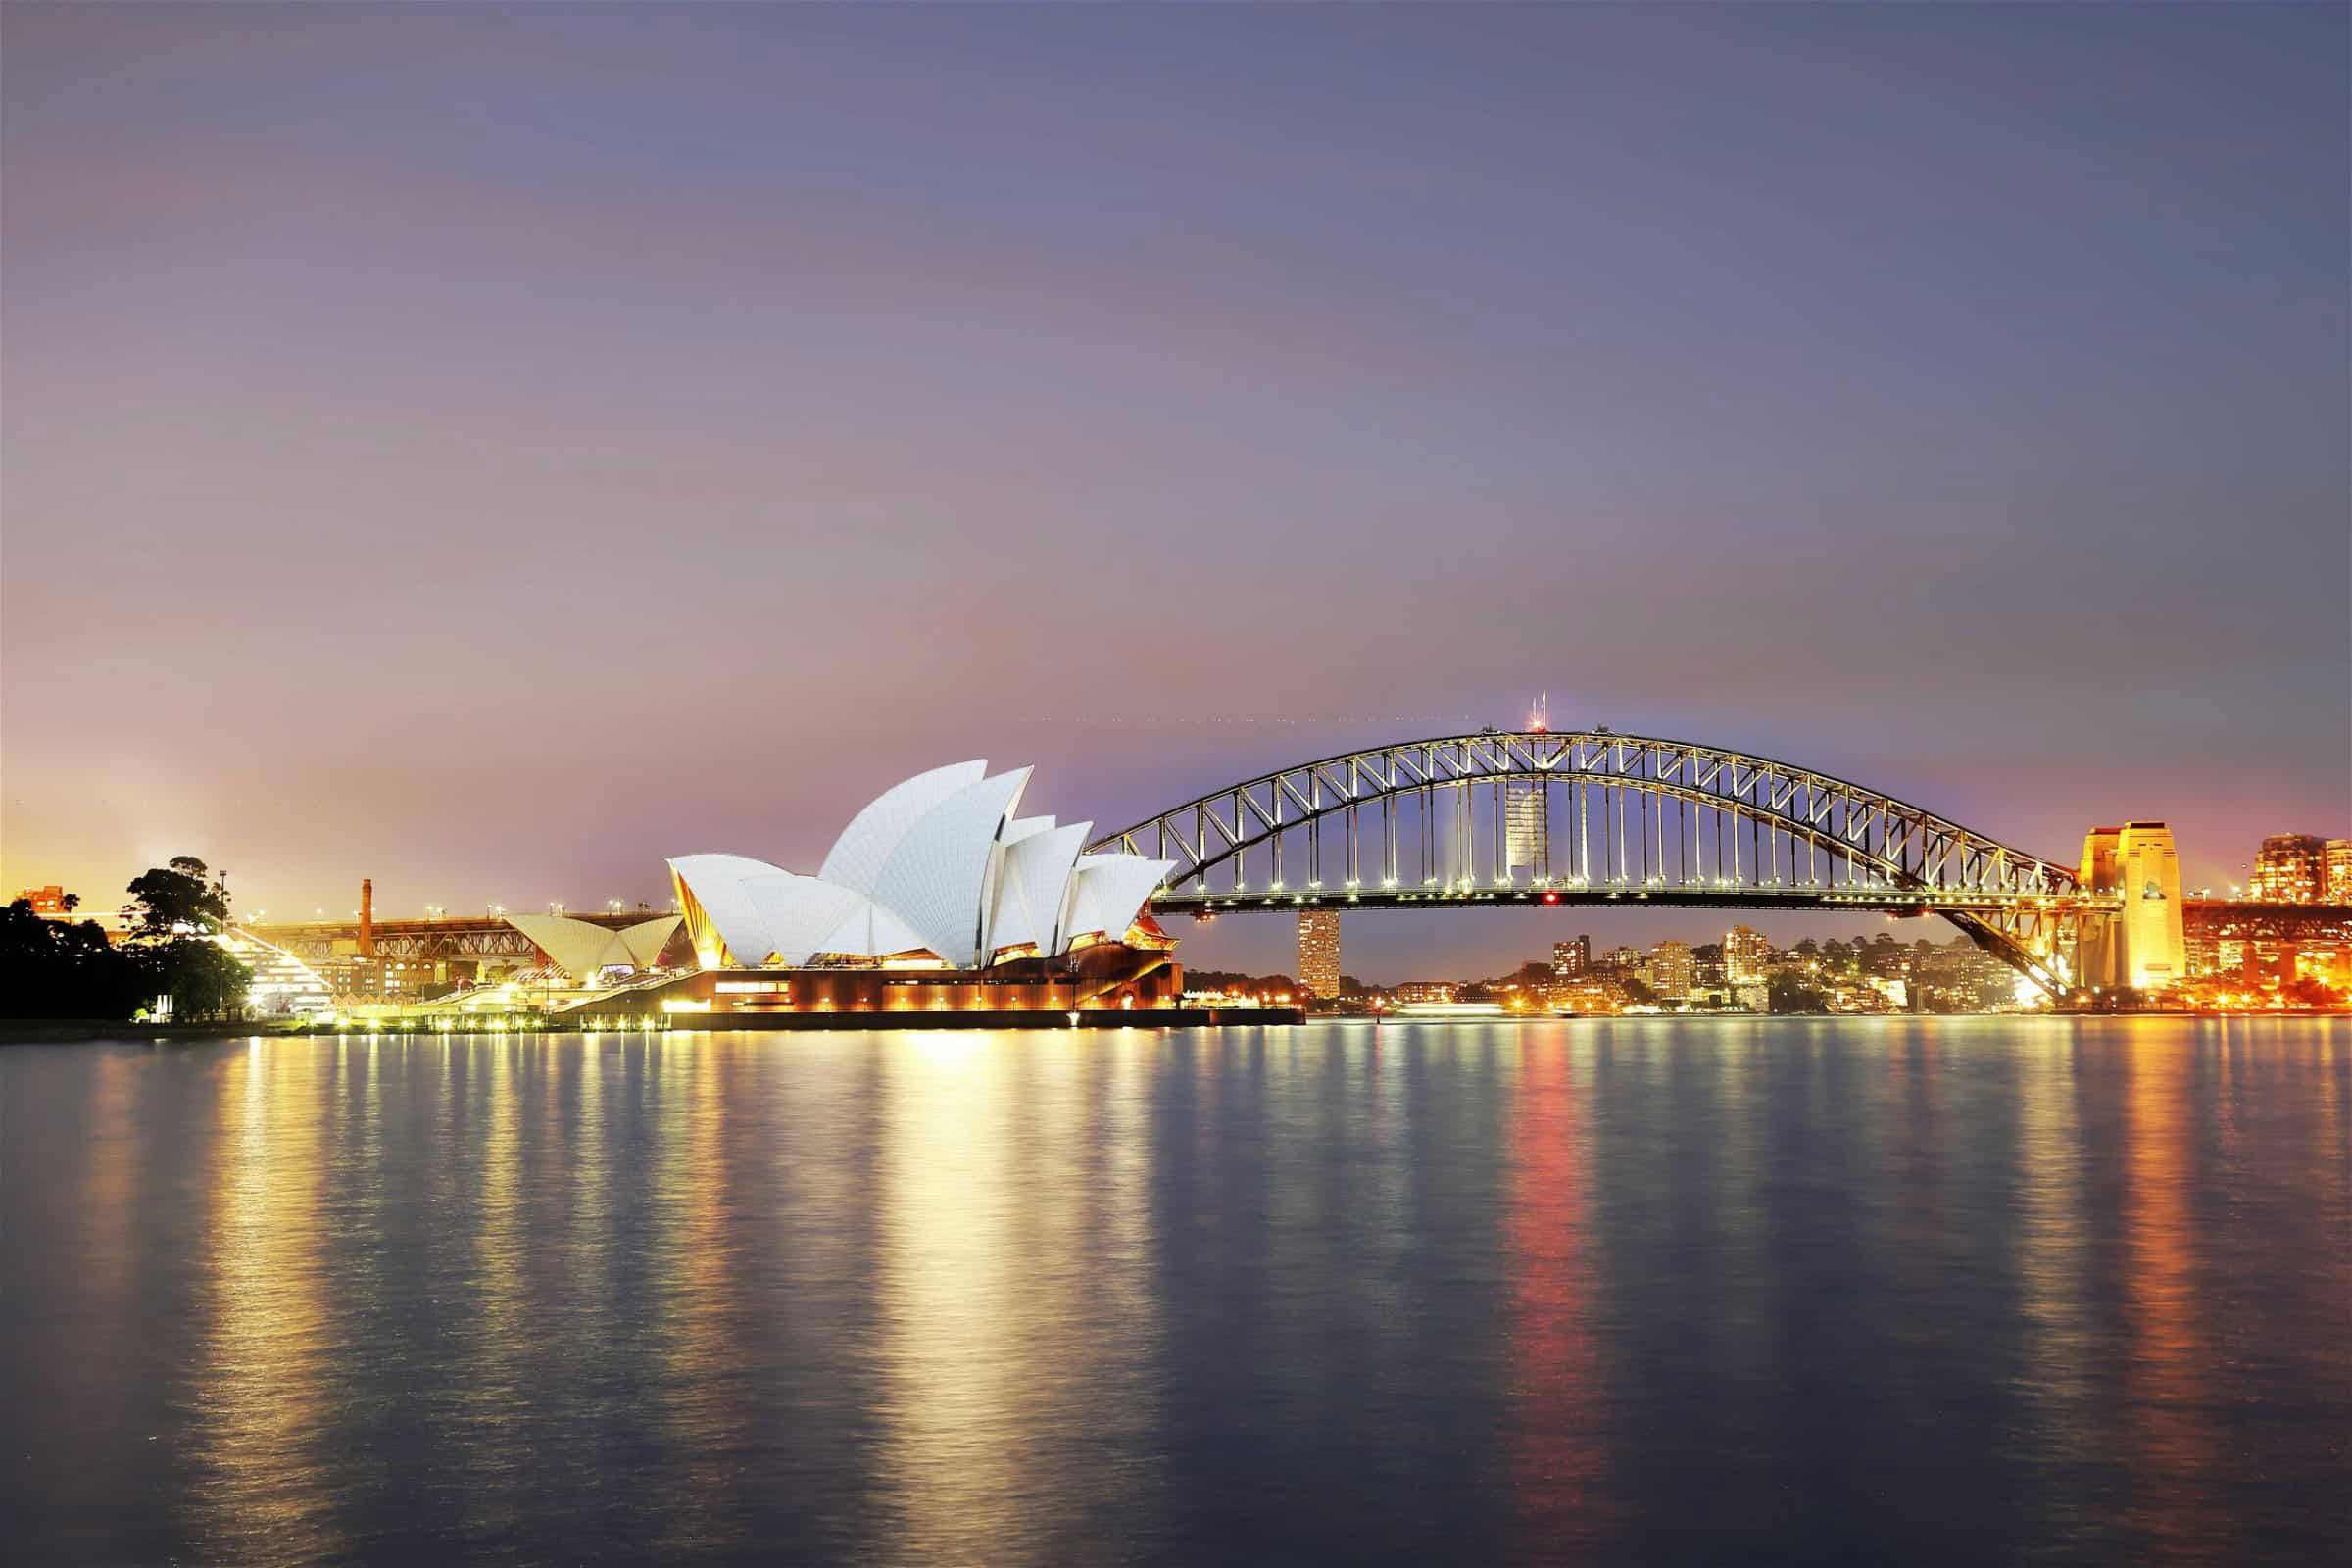 Sydney is Australias best-known city and one of the most popular 